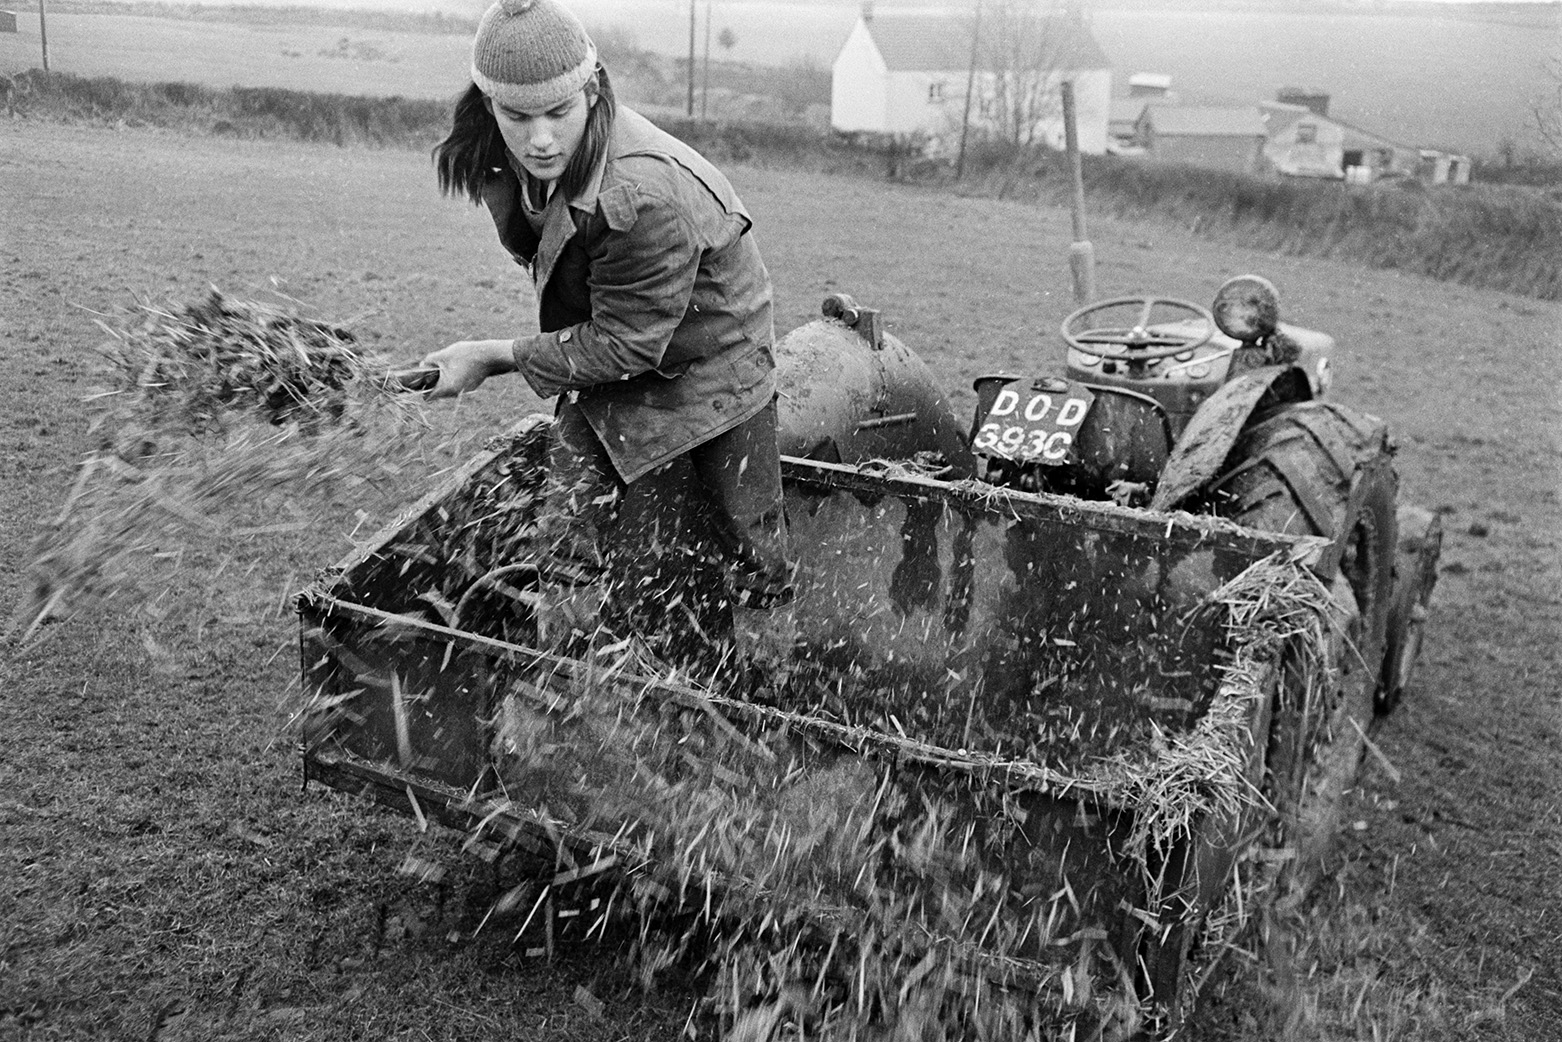 Derek Bright muckspreading by hand from a tractor and link box, in a field at Mill Road Farm, Beaford. The farm was also known as Jeffrys.